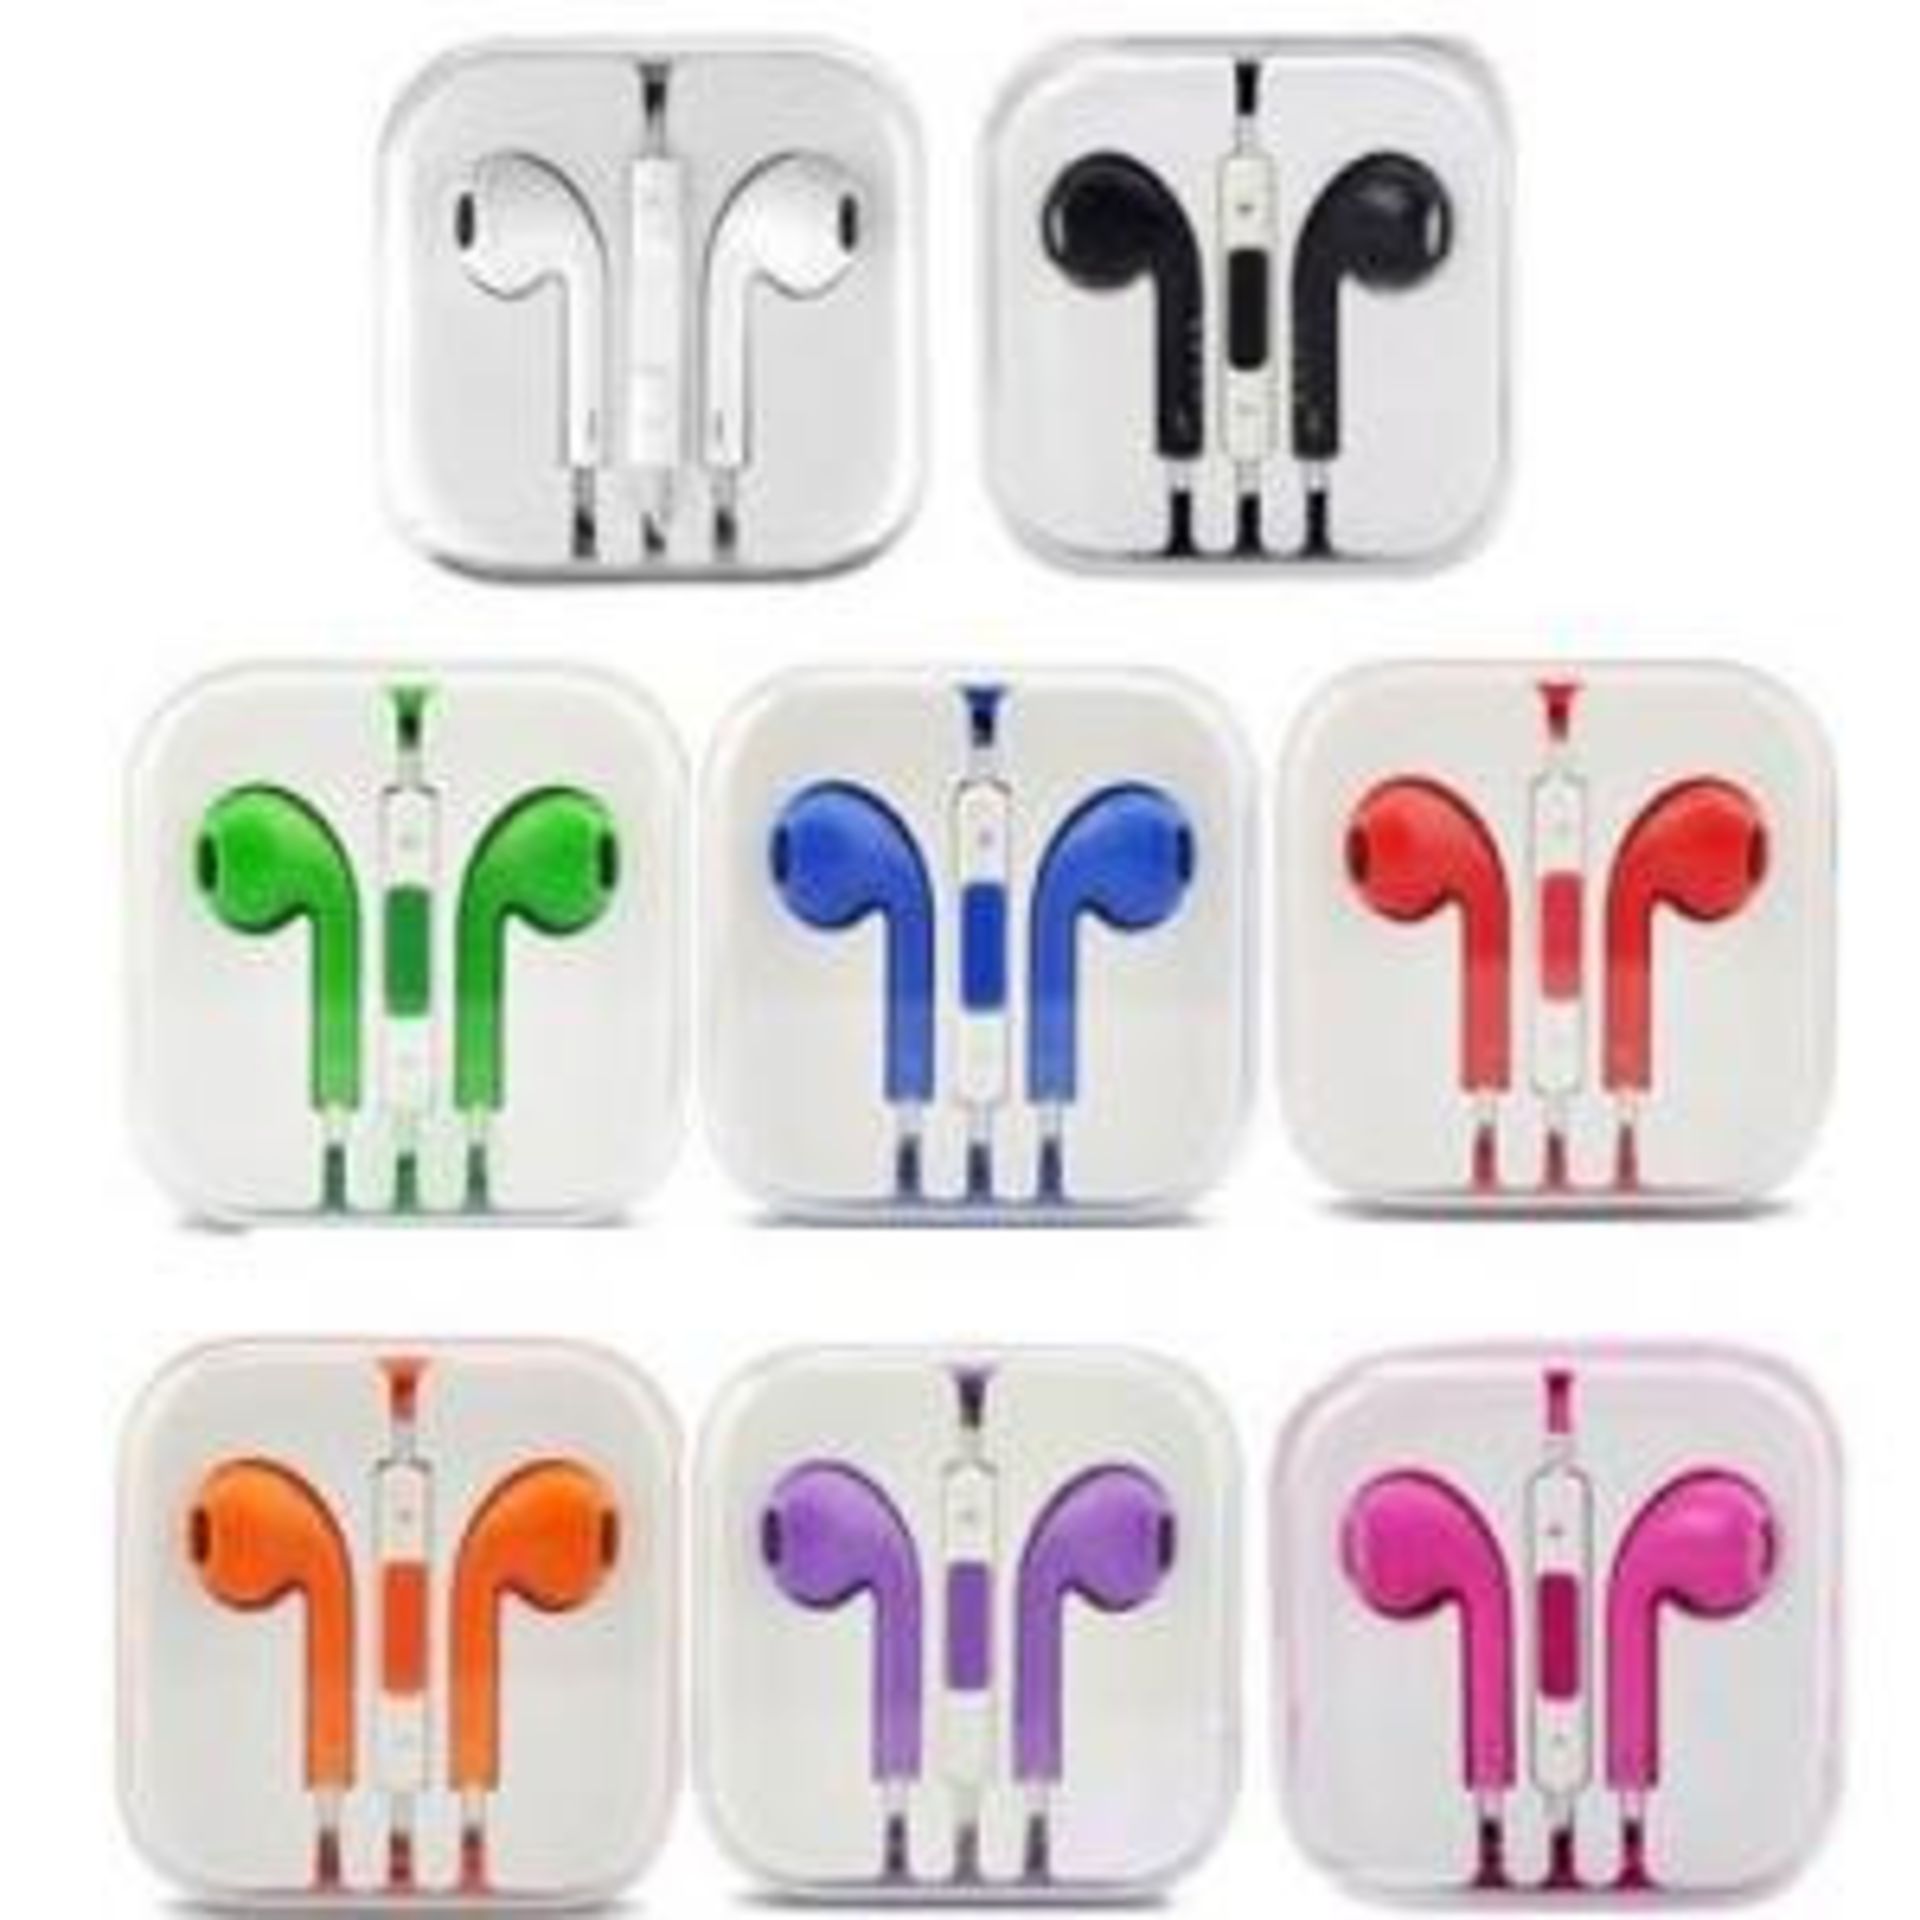 Brand New Two Pairs Of Multi-Coloured Earbud Earphones With Hard Plastic Case (You Will Get Two